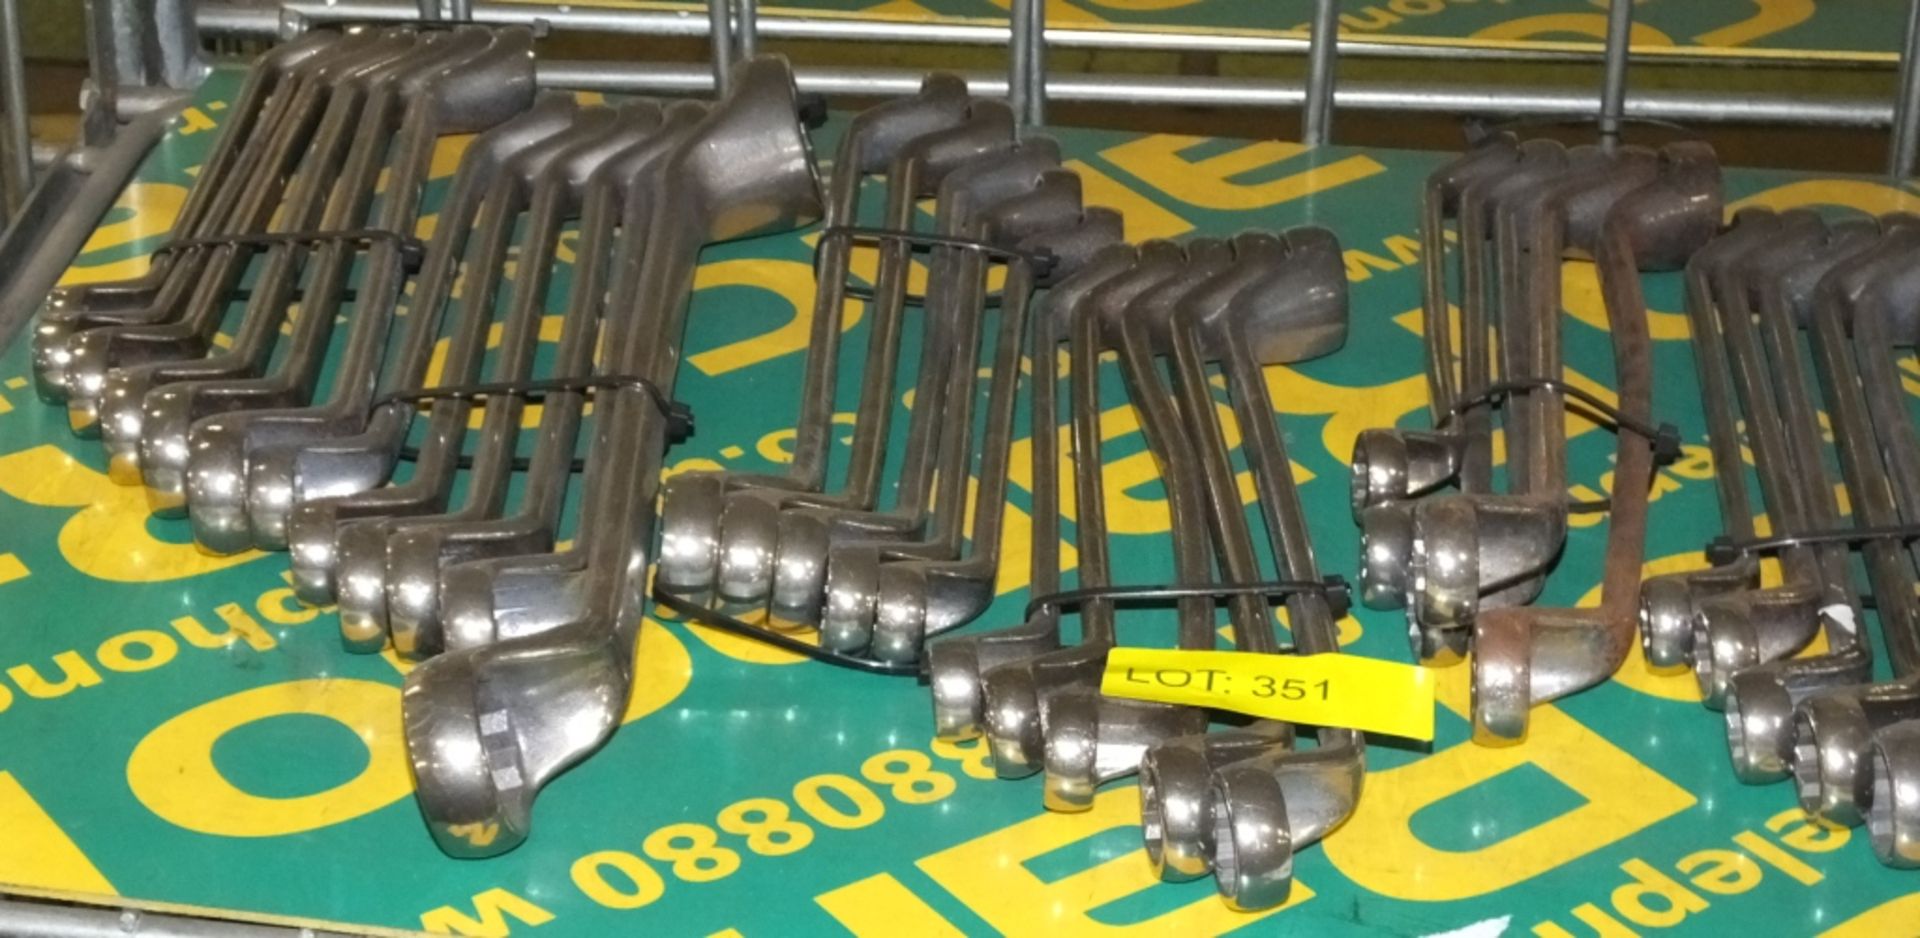 7 sets of Ring Spanners - Image 3 of 3